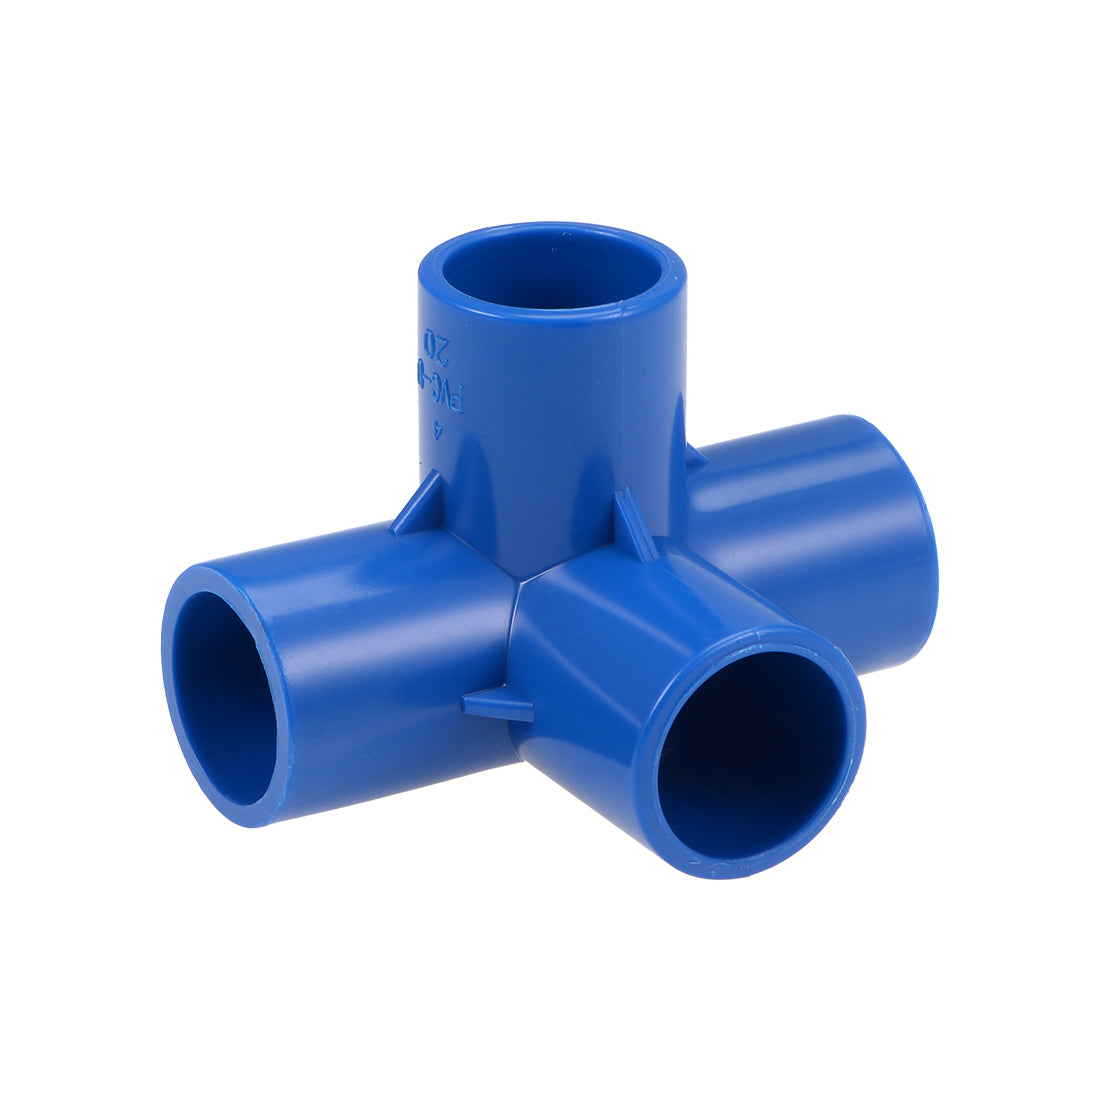 uxcell Uxcell 4 Way 20mm Tee Metric PVC Fitting Elbow - PVC Furniture - PVC Elbow Fittings Blue 2Pcs